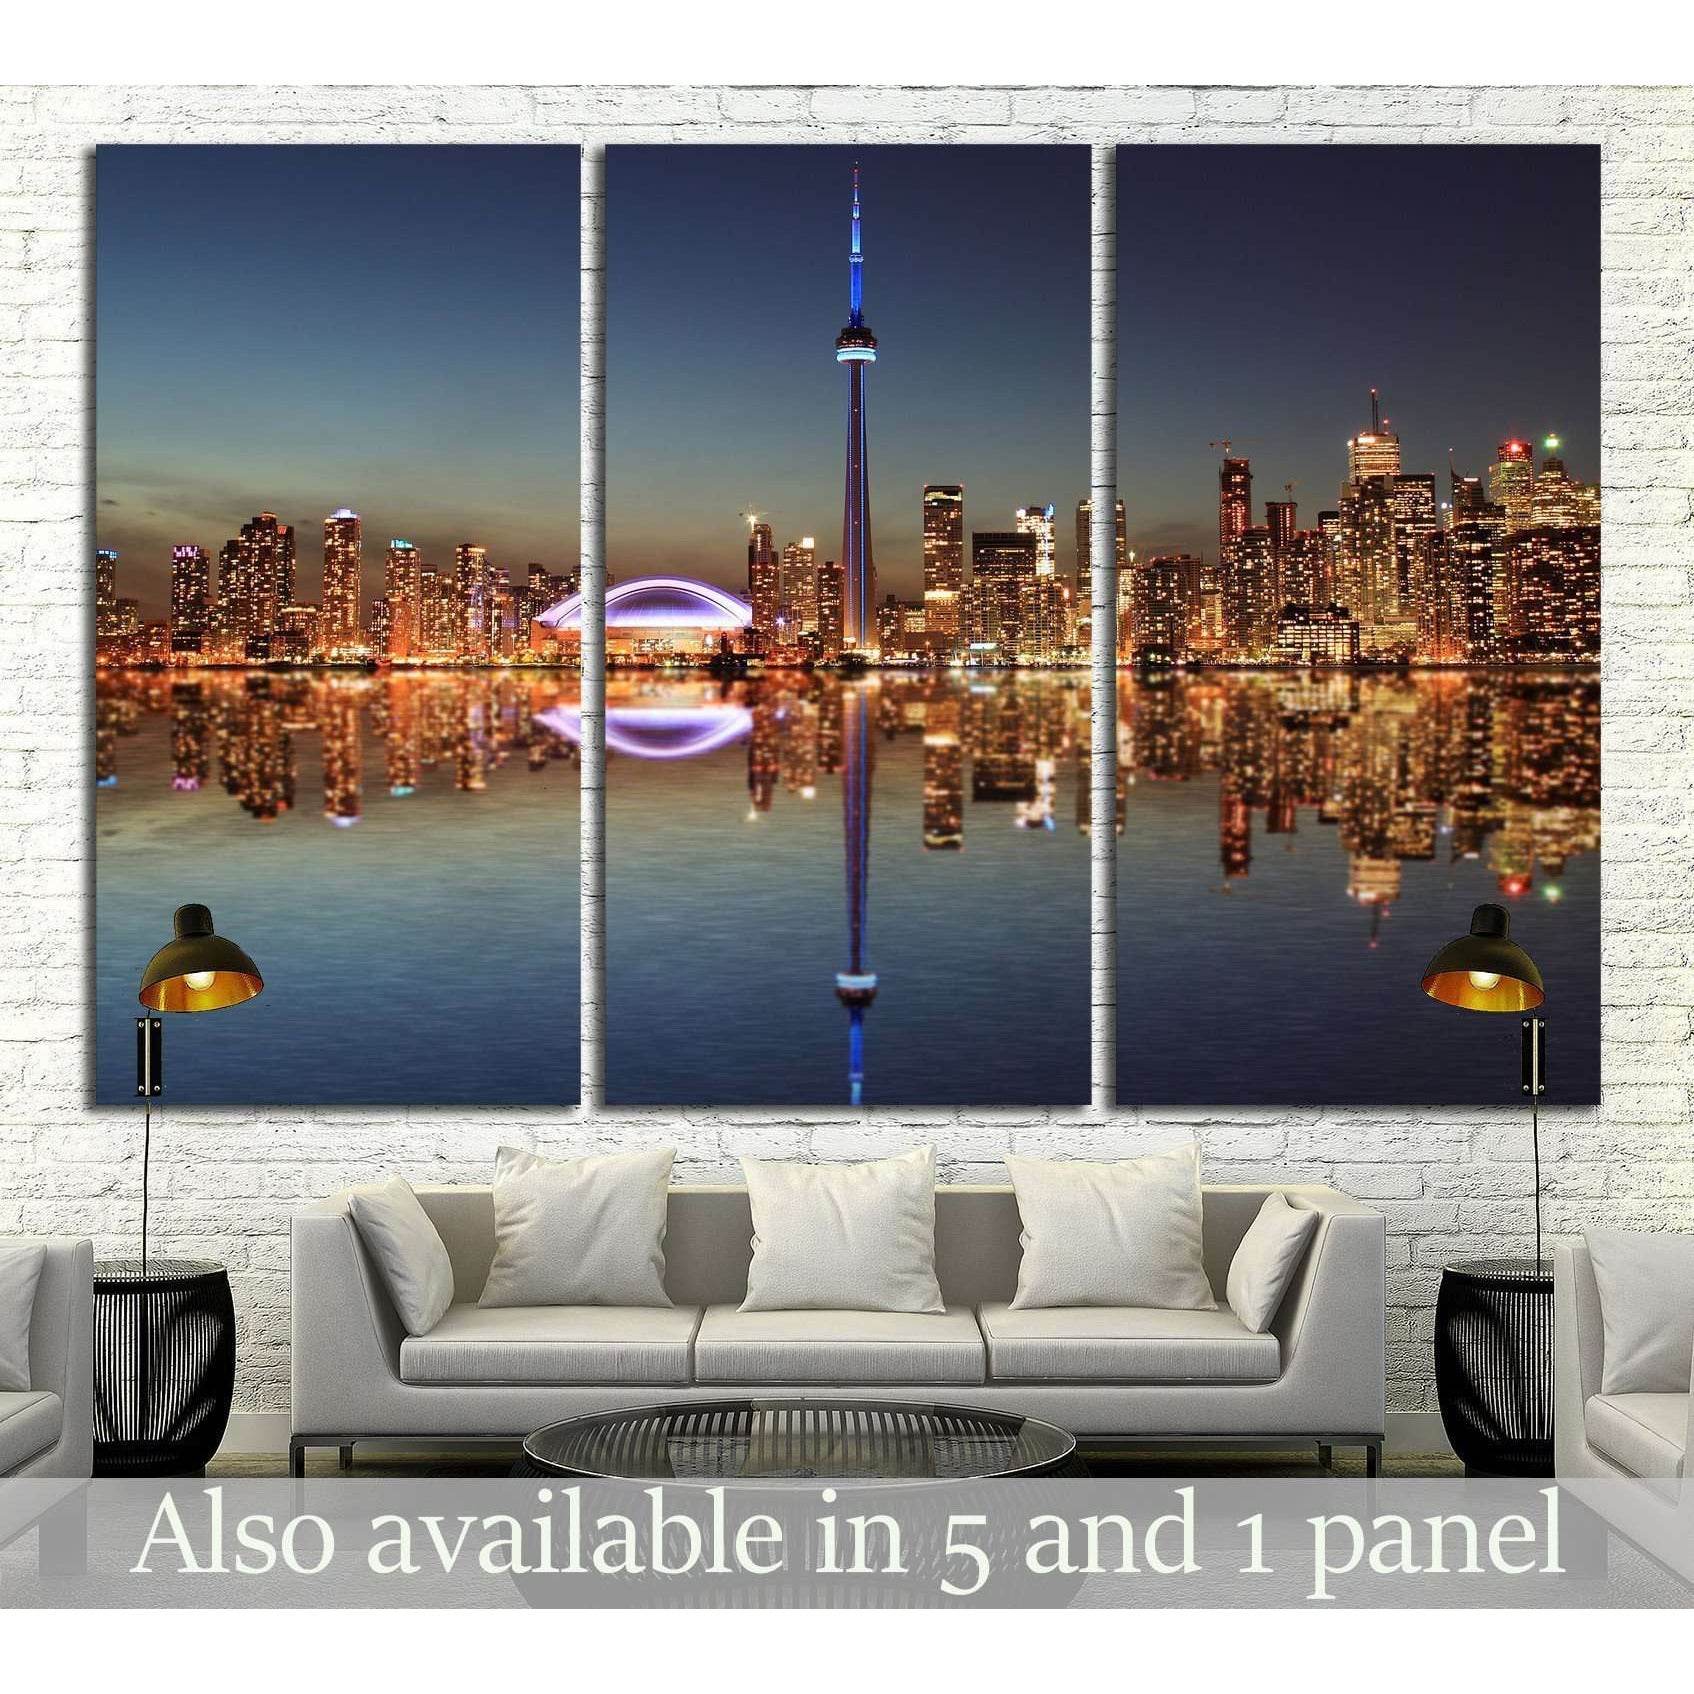 Toronto Skyline at night with a reflection in Lake Ontario №2040 Ready to Hang Canvas Print